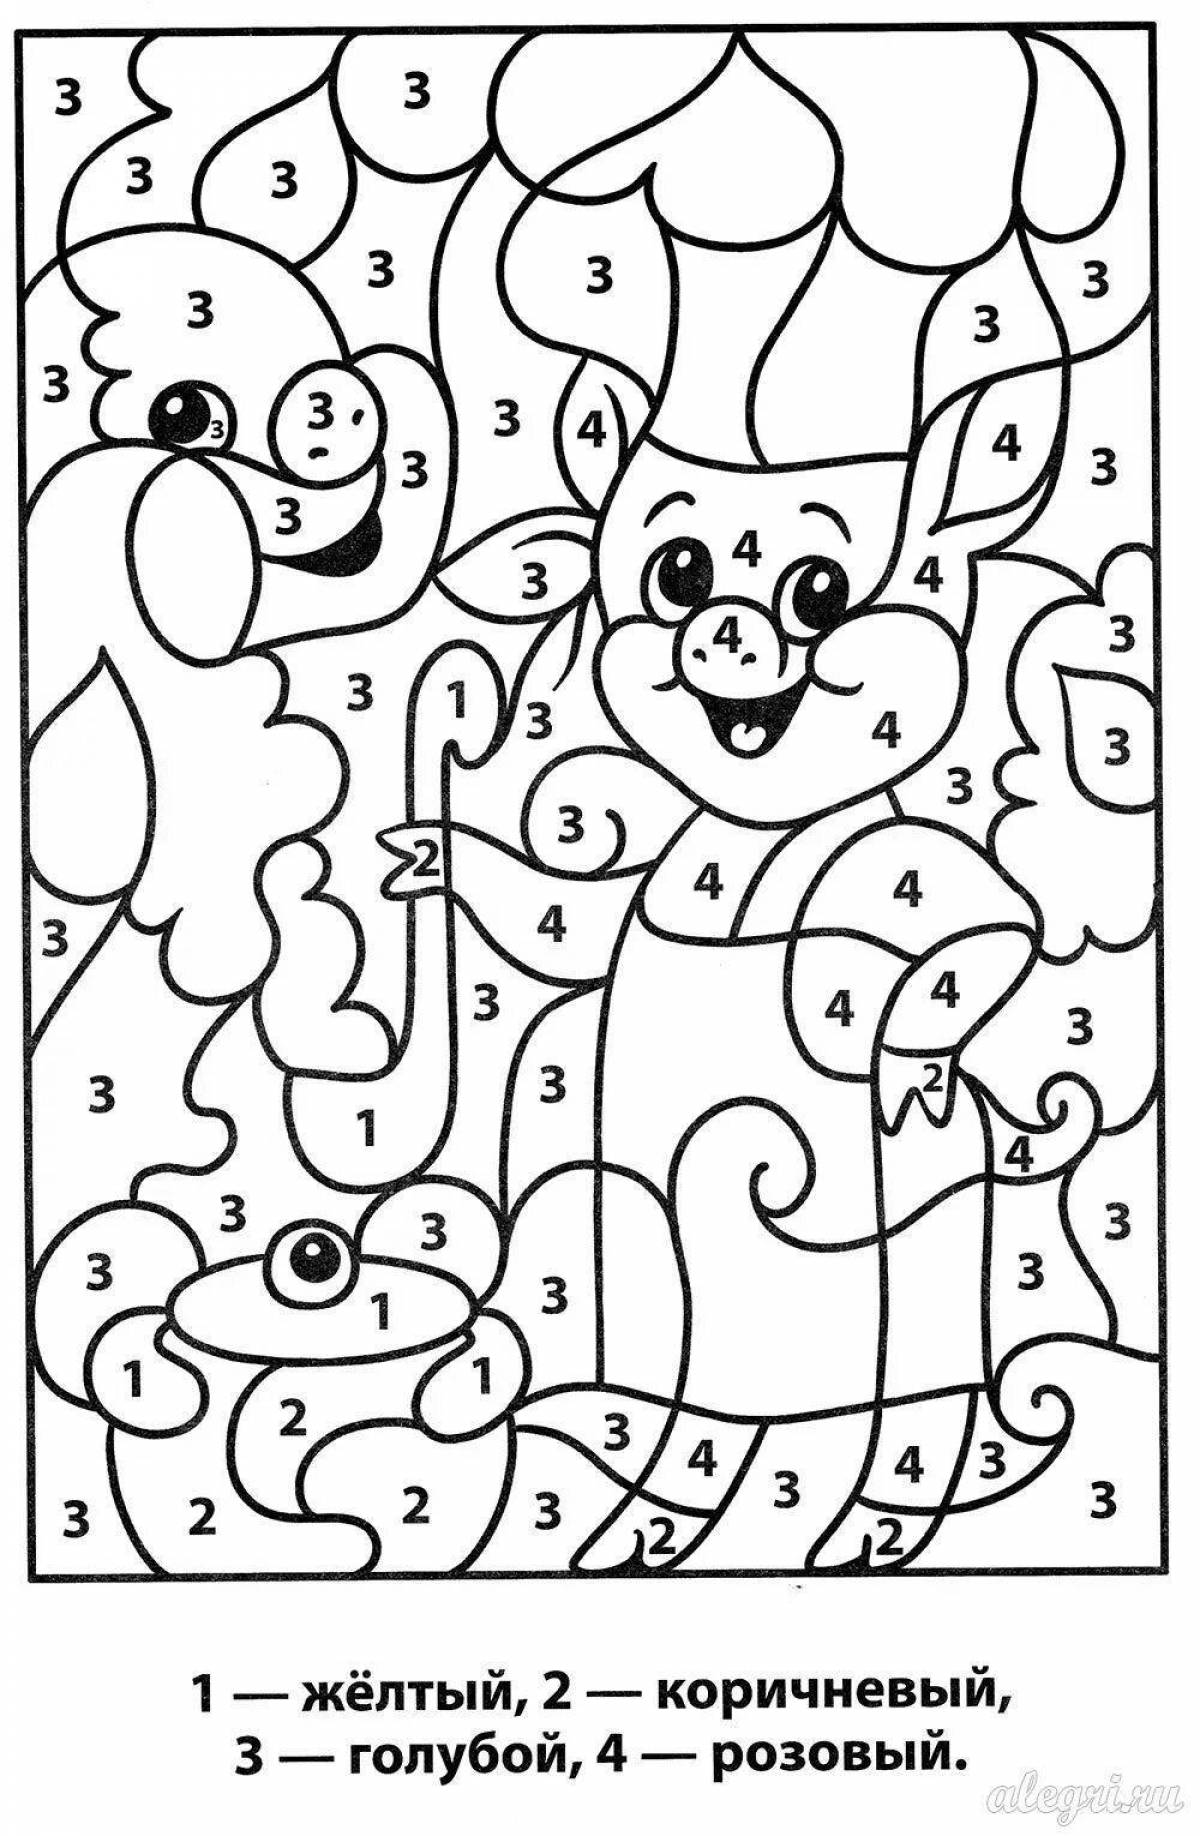 Playful coloring page 6 years old by numbers